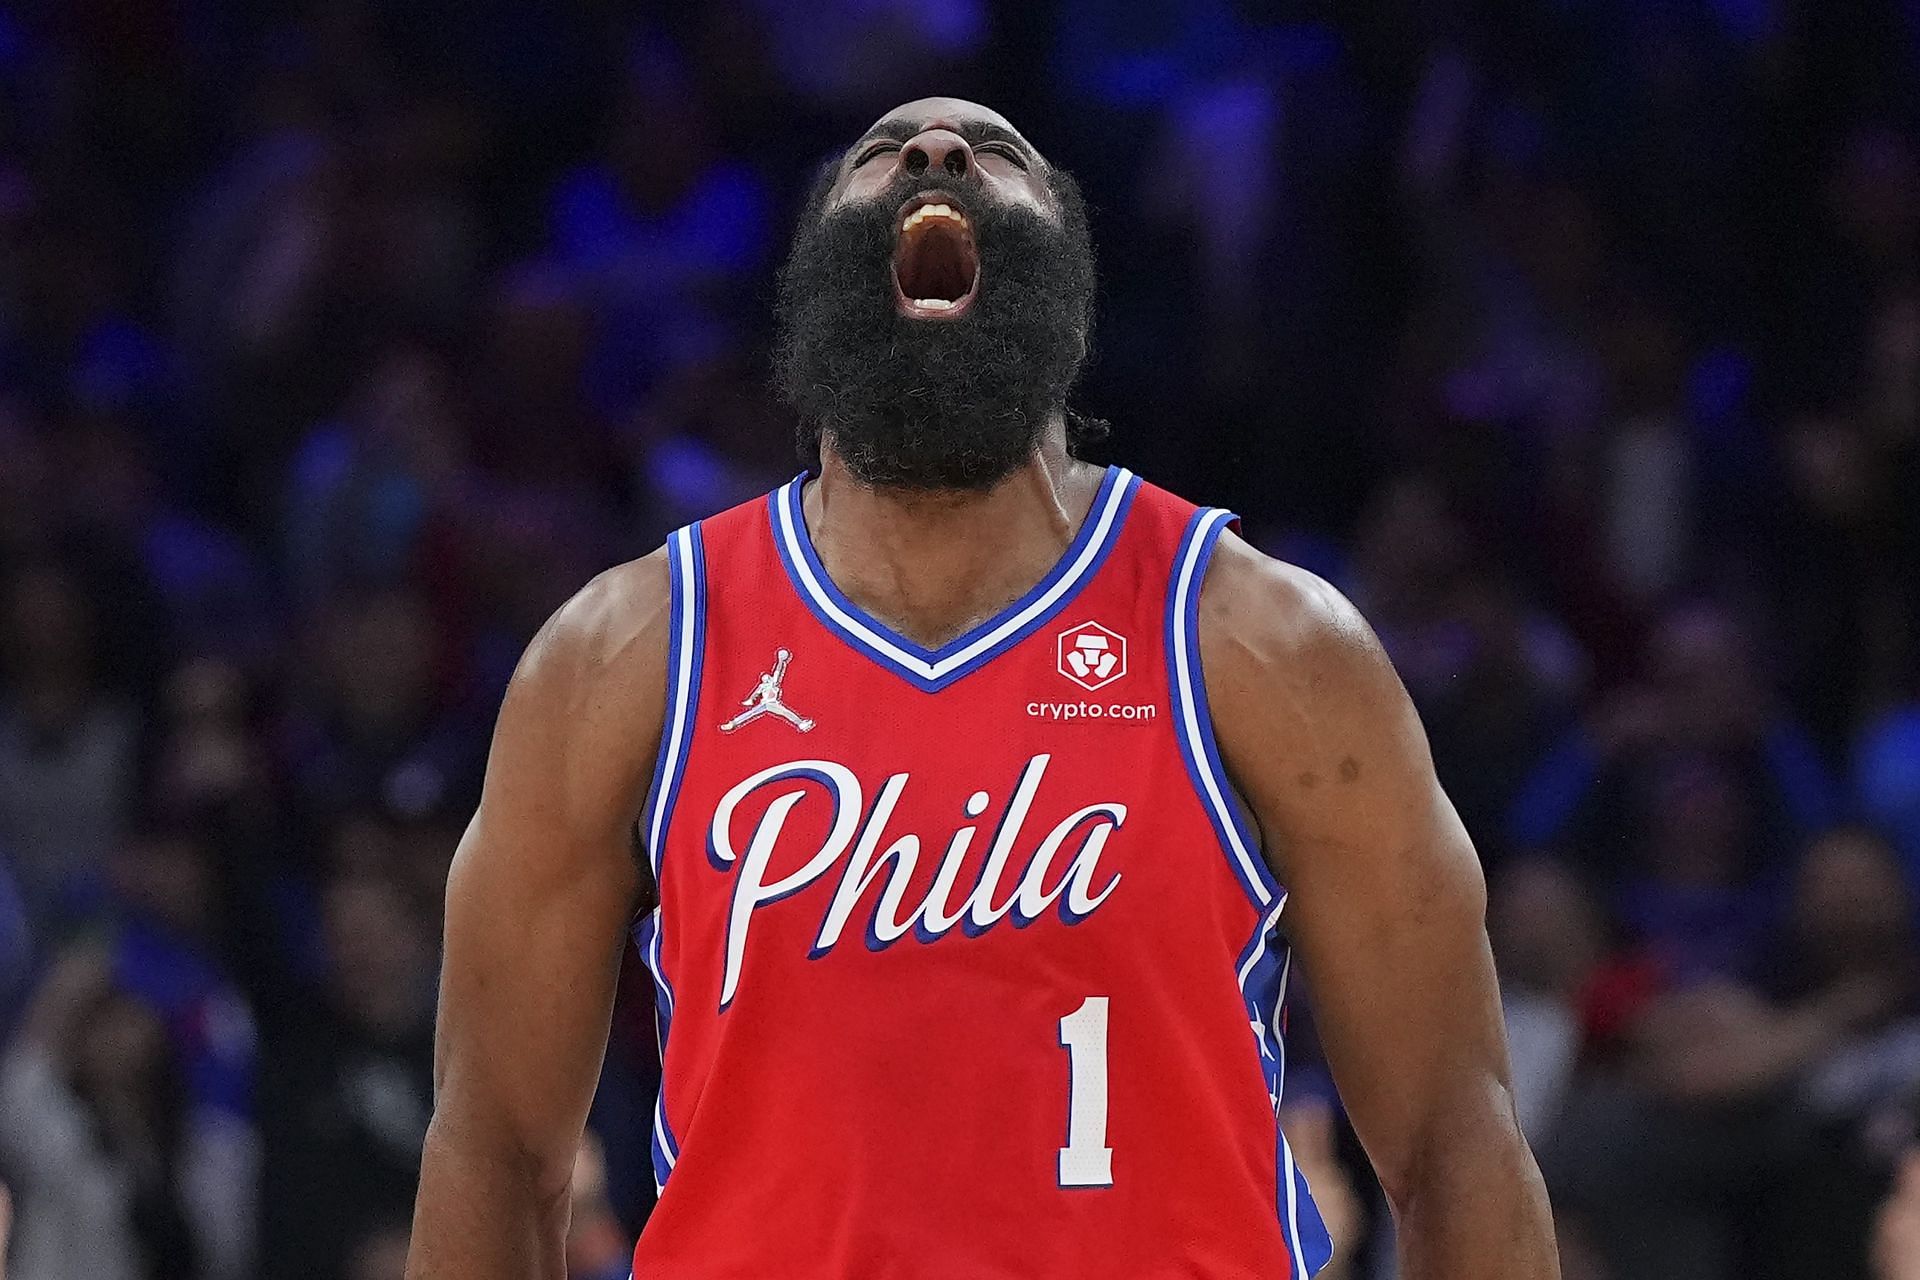 Philadelphia fans are confident in their team&#039;s future with the return of Harden.